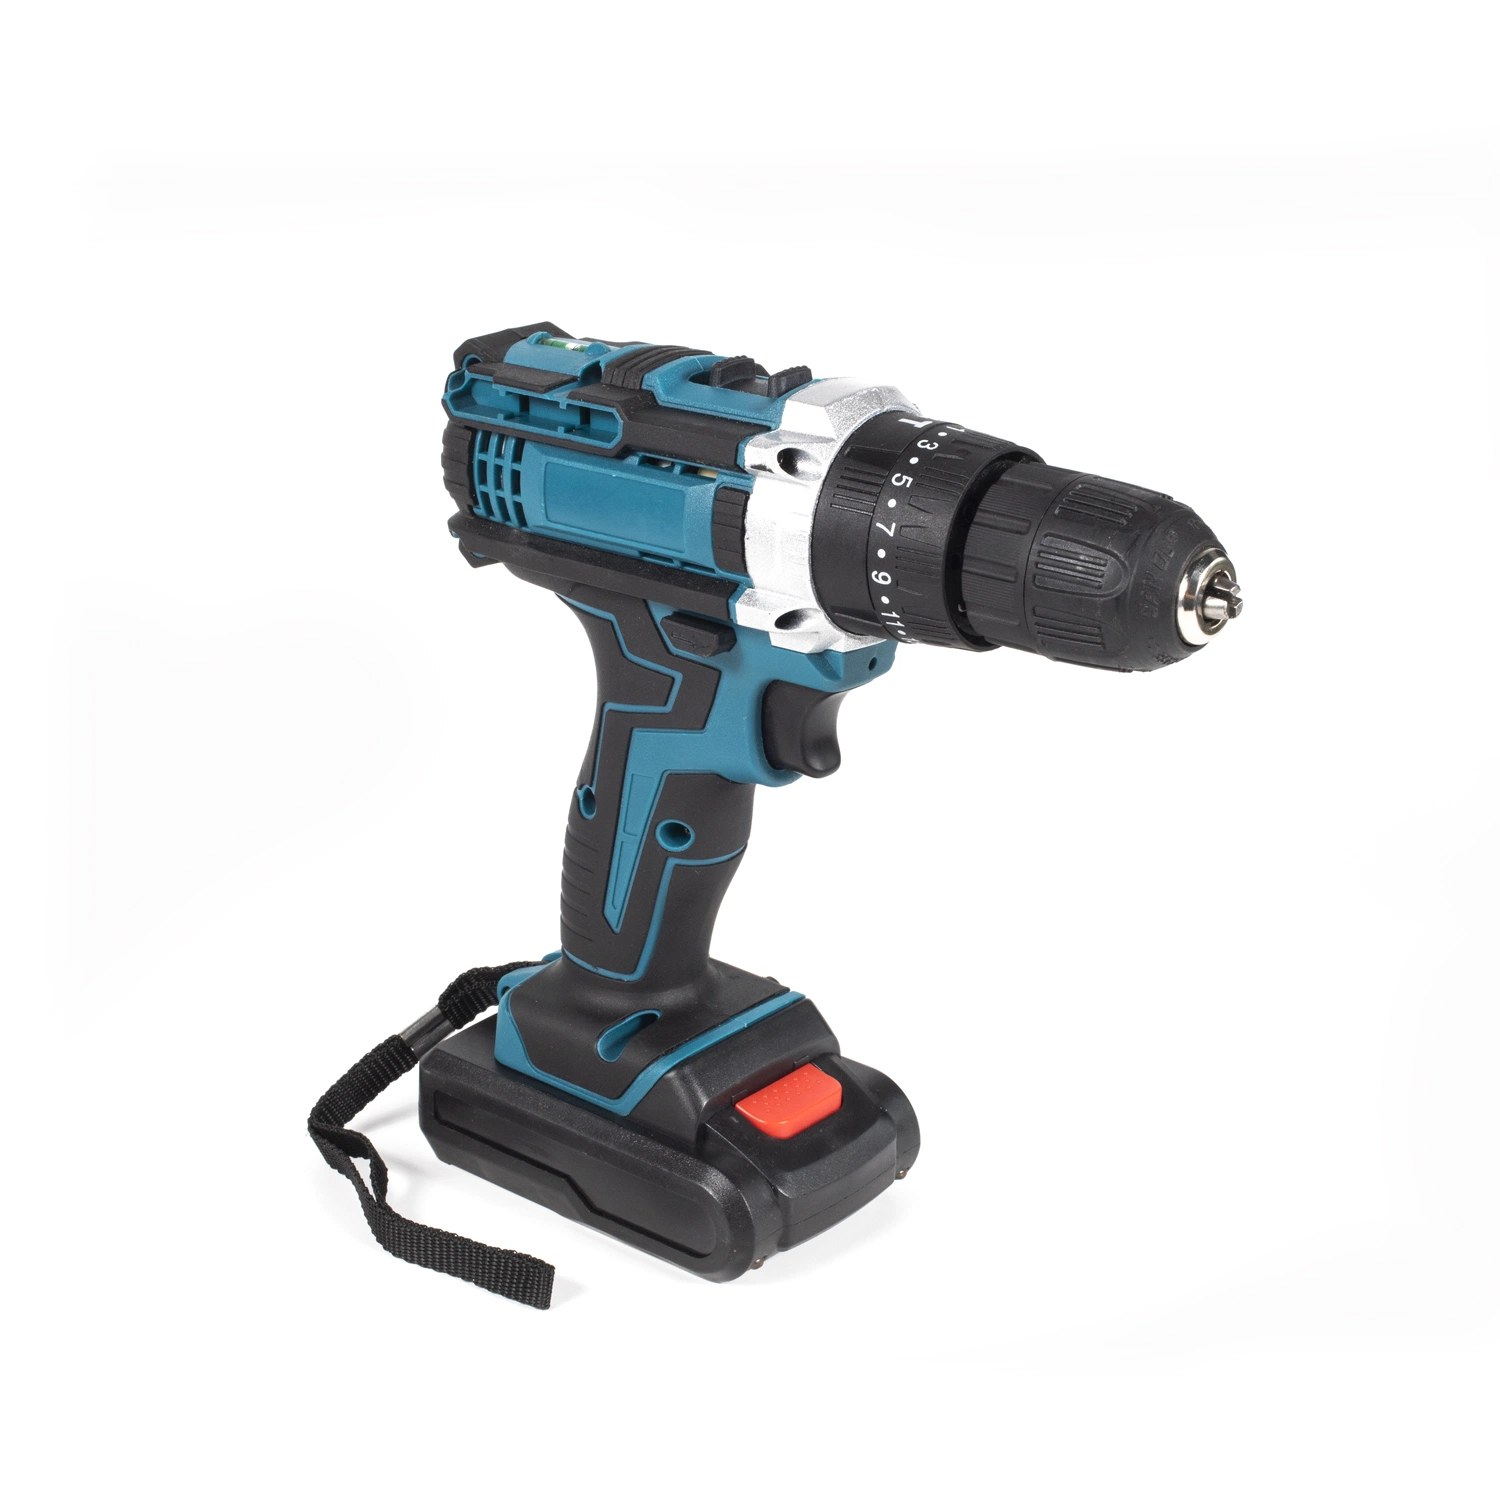 Behappy Cordless Drill 1500W Electric Hand Drill Tools for DIY 1150rpm Brushless Power Tool